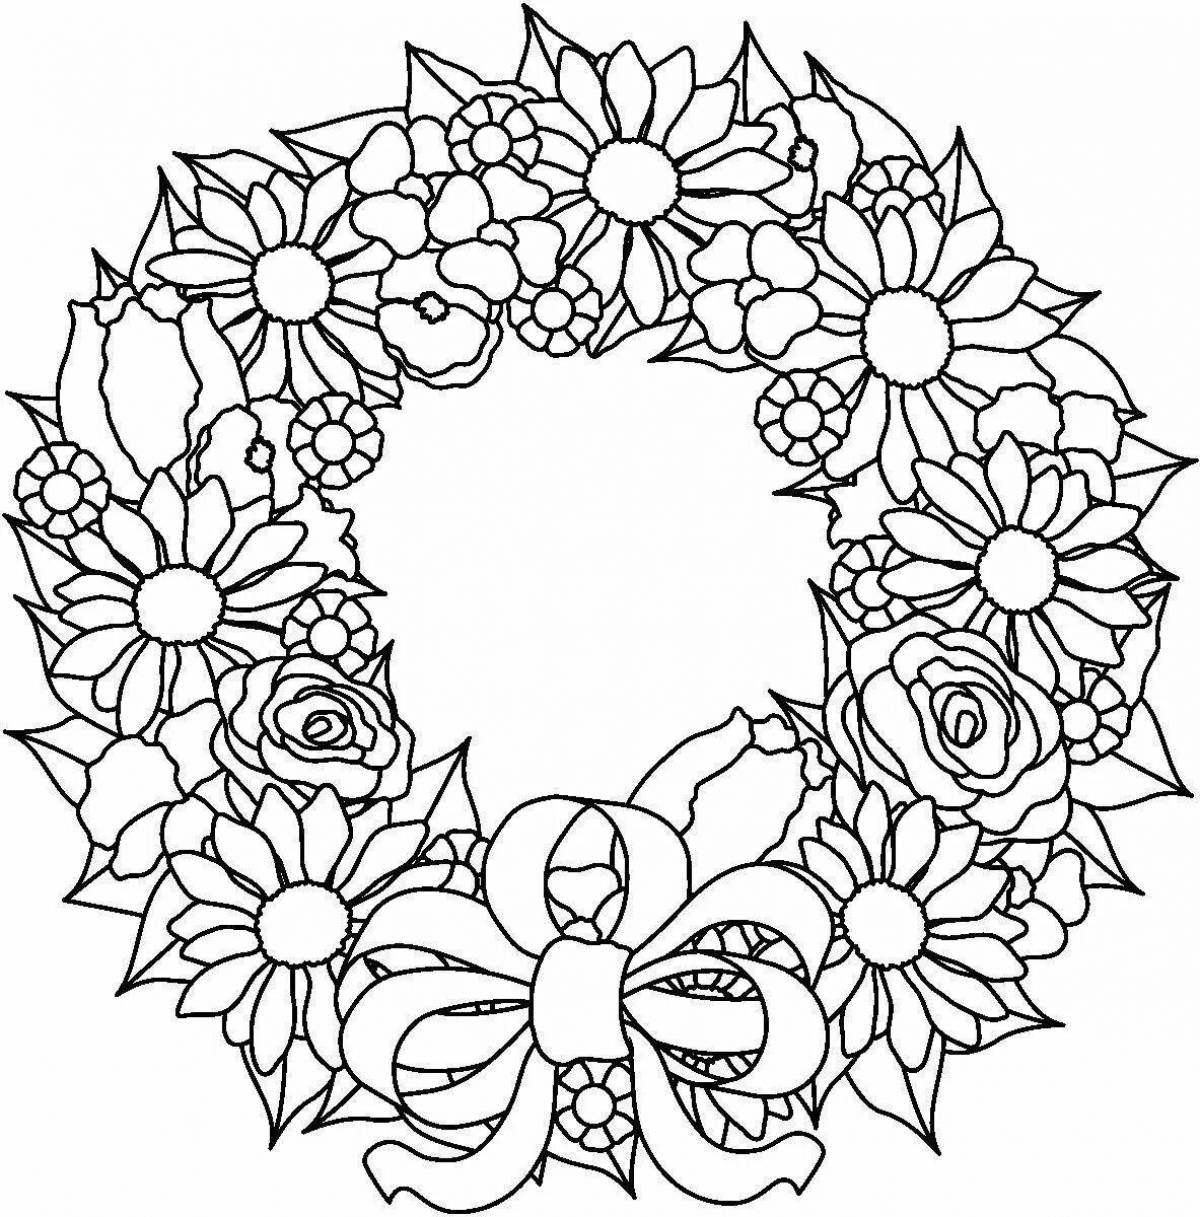 Wreath live coloring page